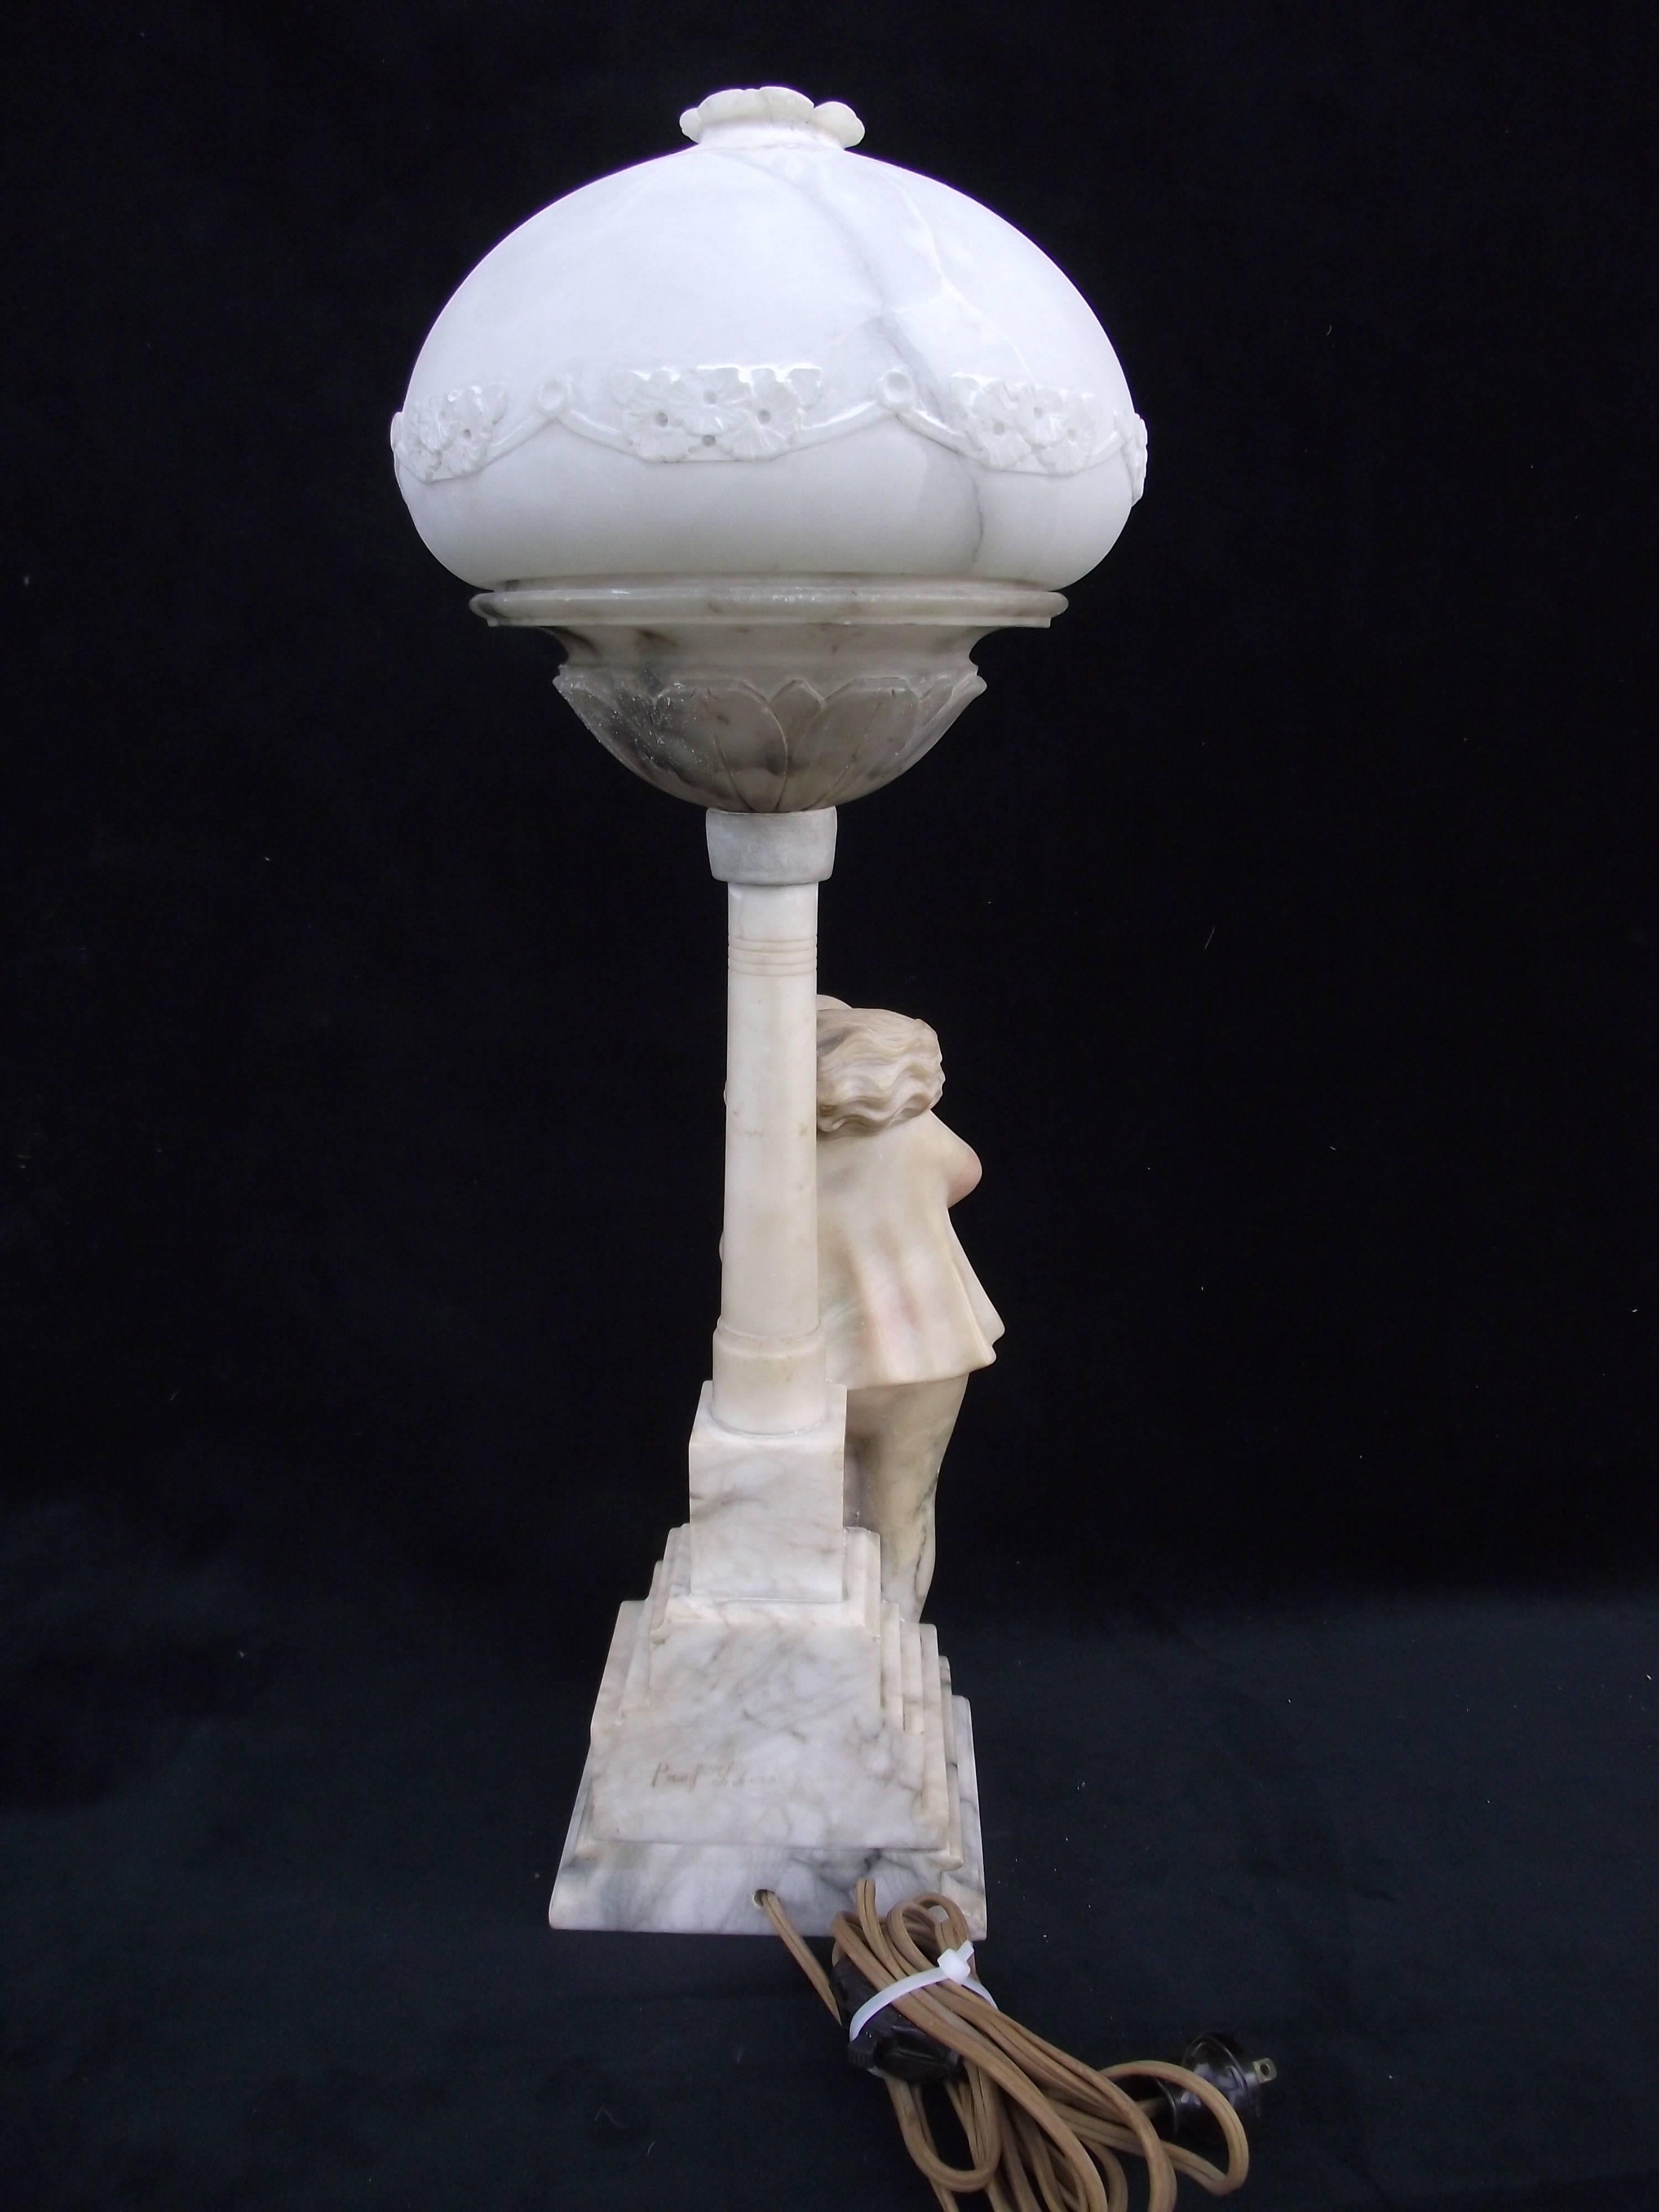 Italian Alabaster Pierrot Clown Lamp, Signed, Hand-Carved Alabaster Lamp For Sale